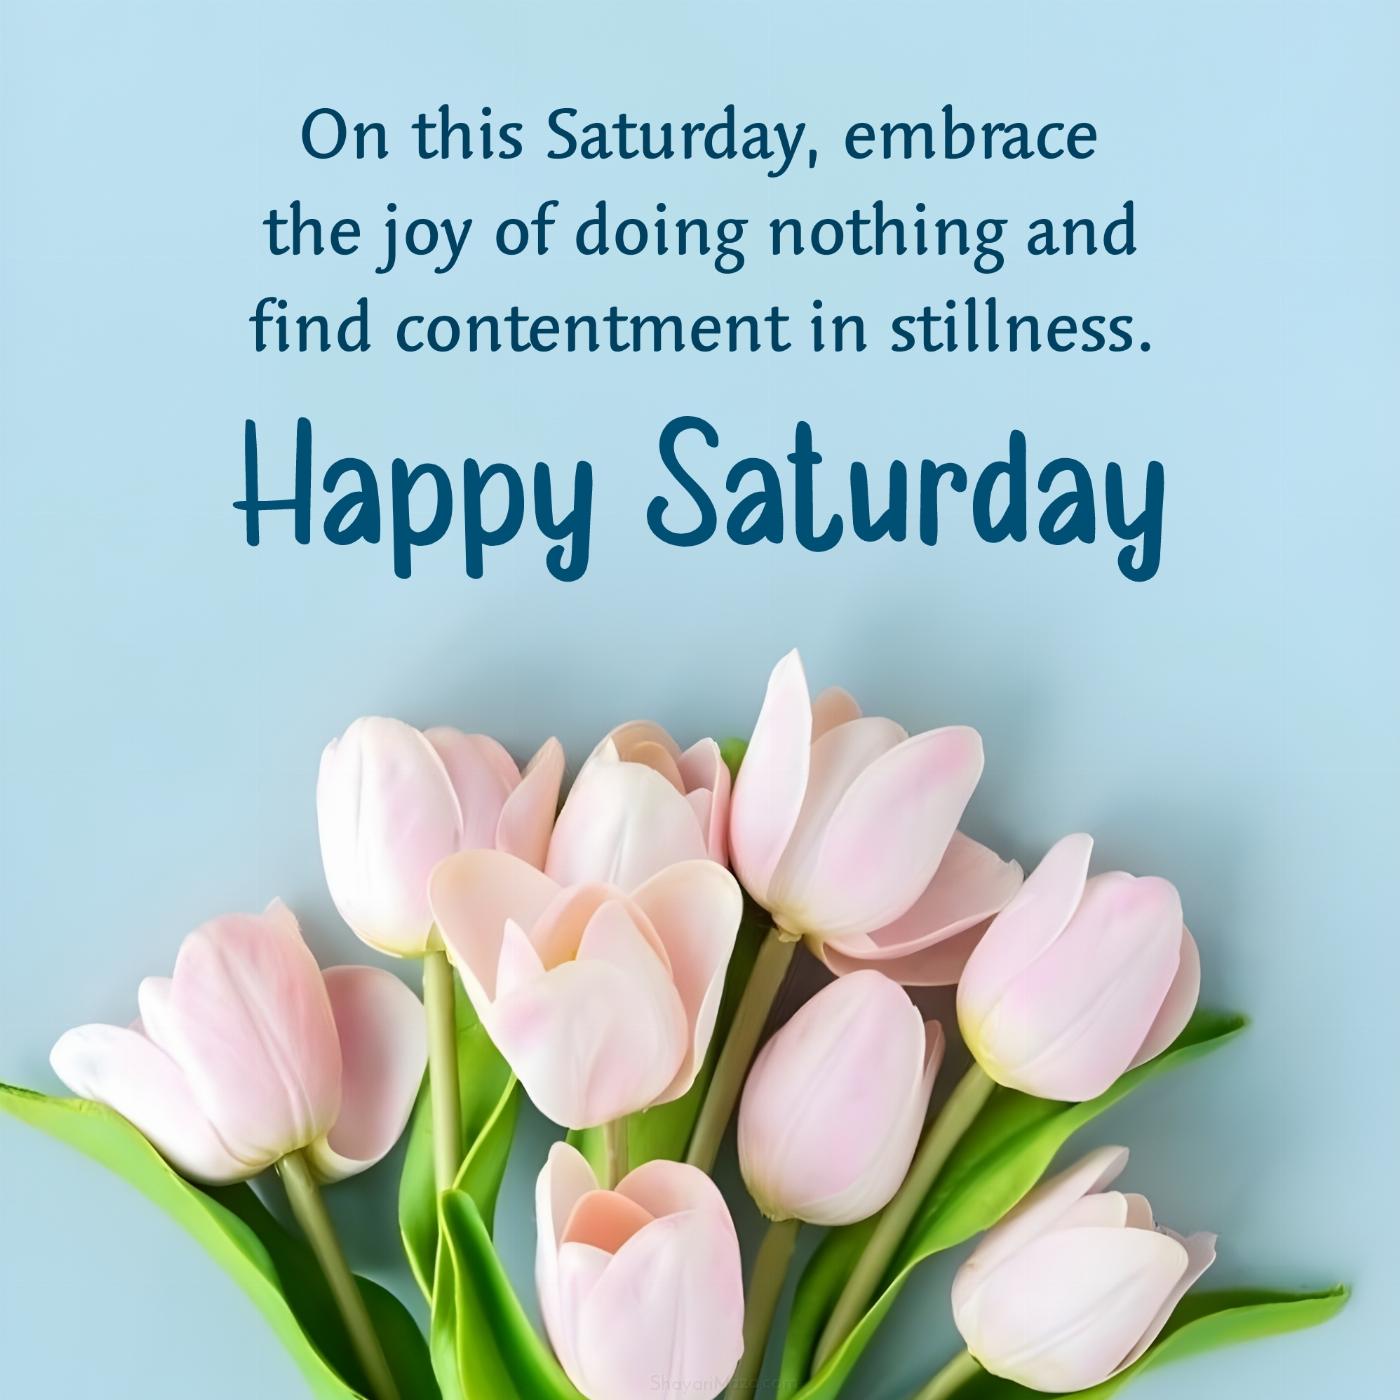 On this Saturday embrace the joy of doing nothing